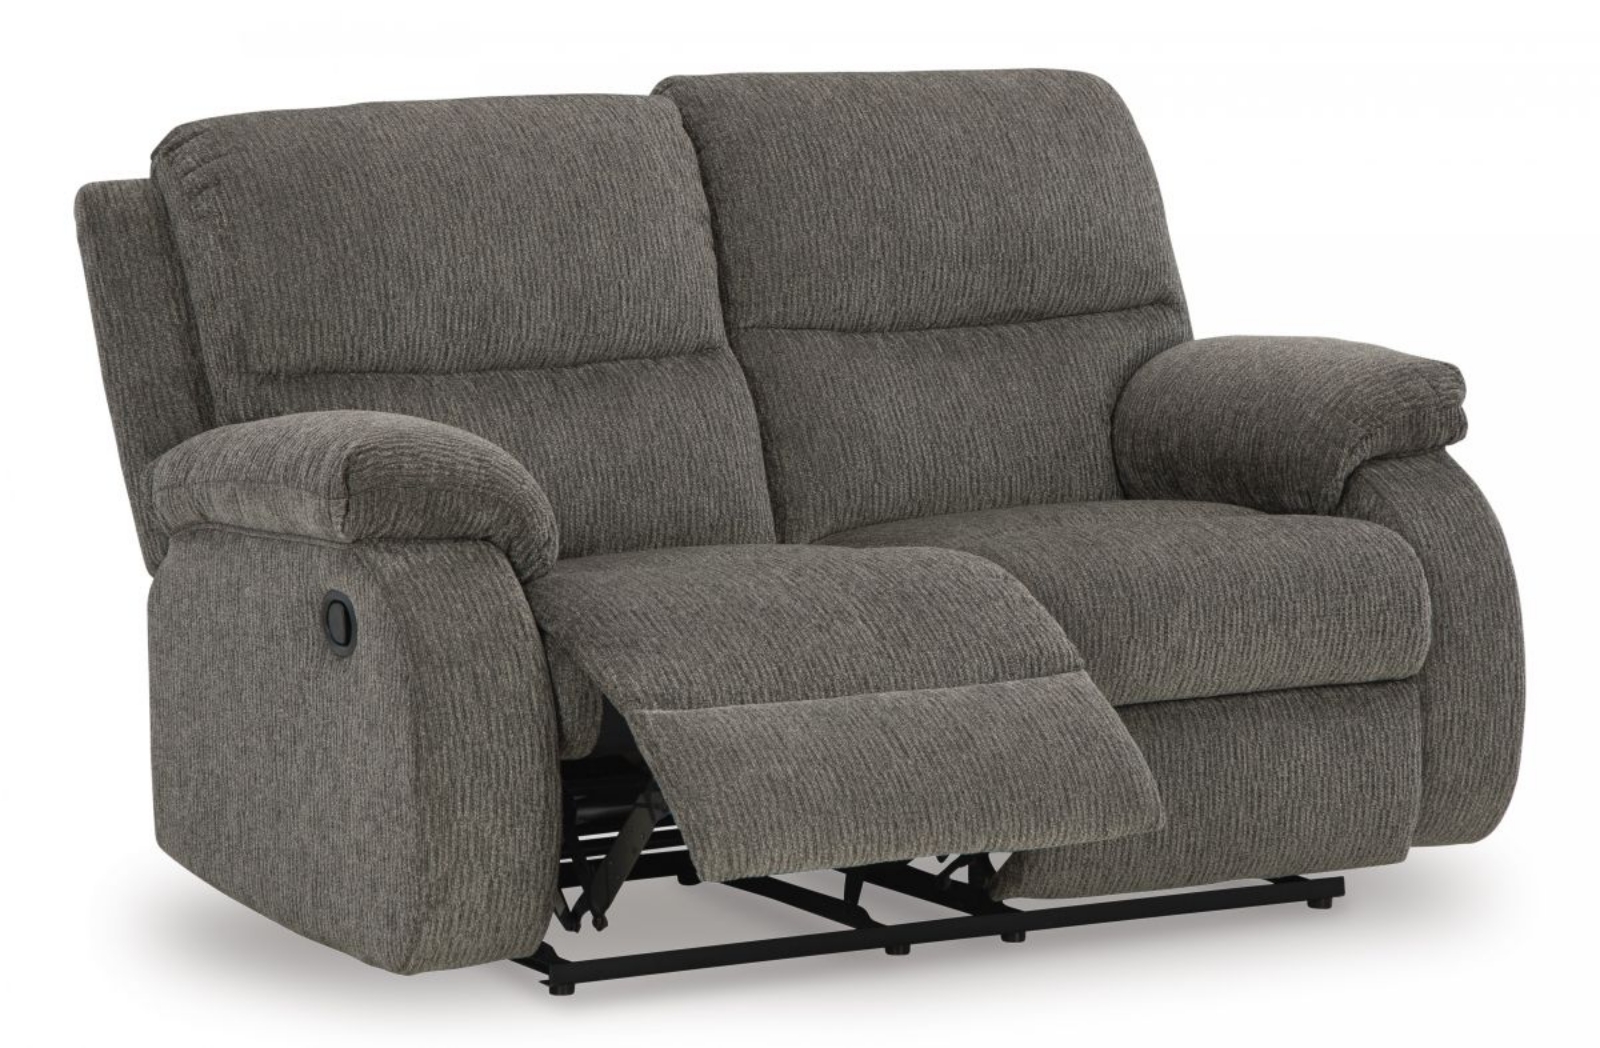 Picture of Scranto Reclining Loveseat